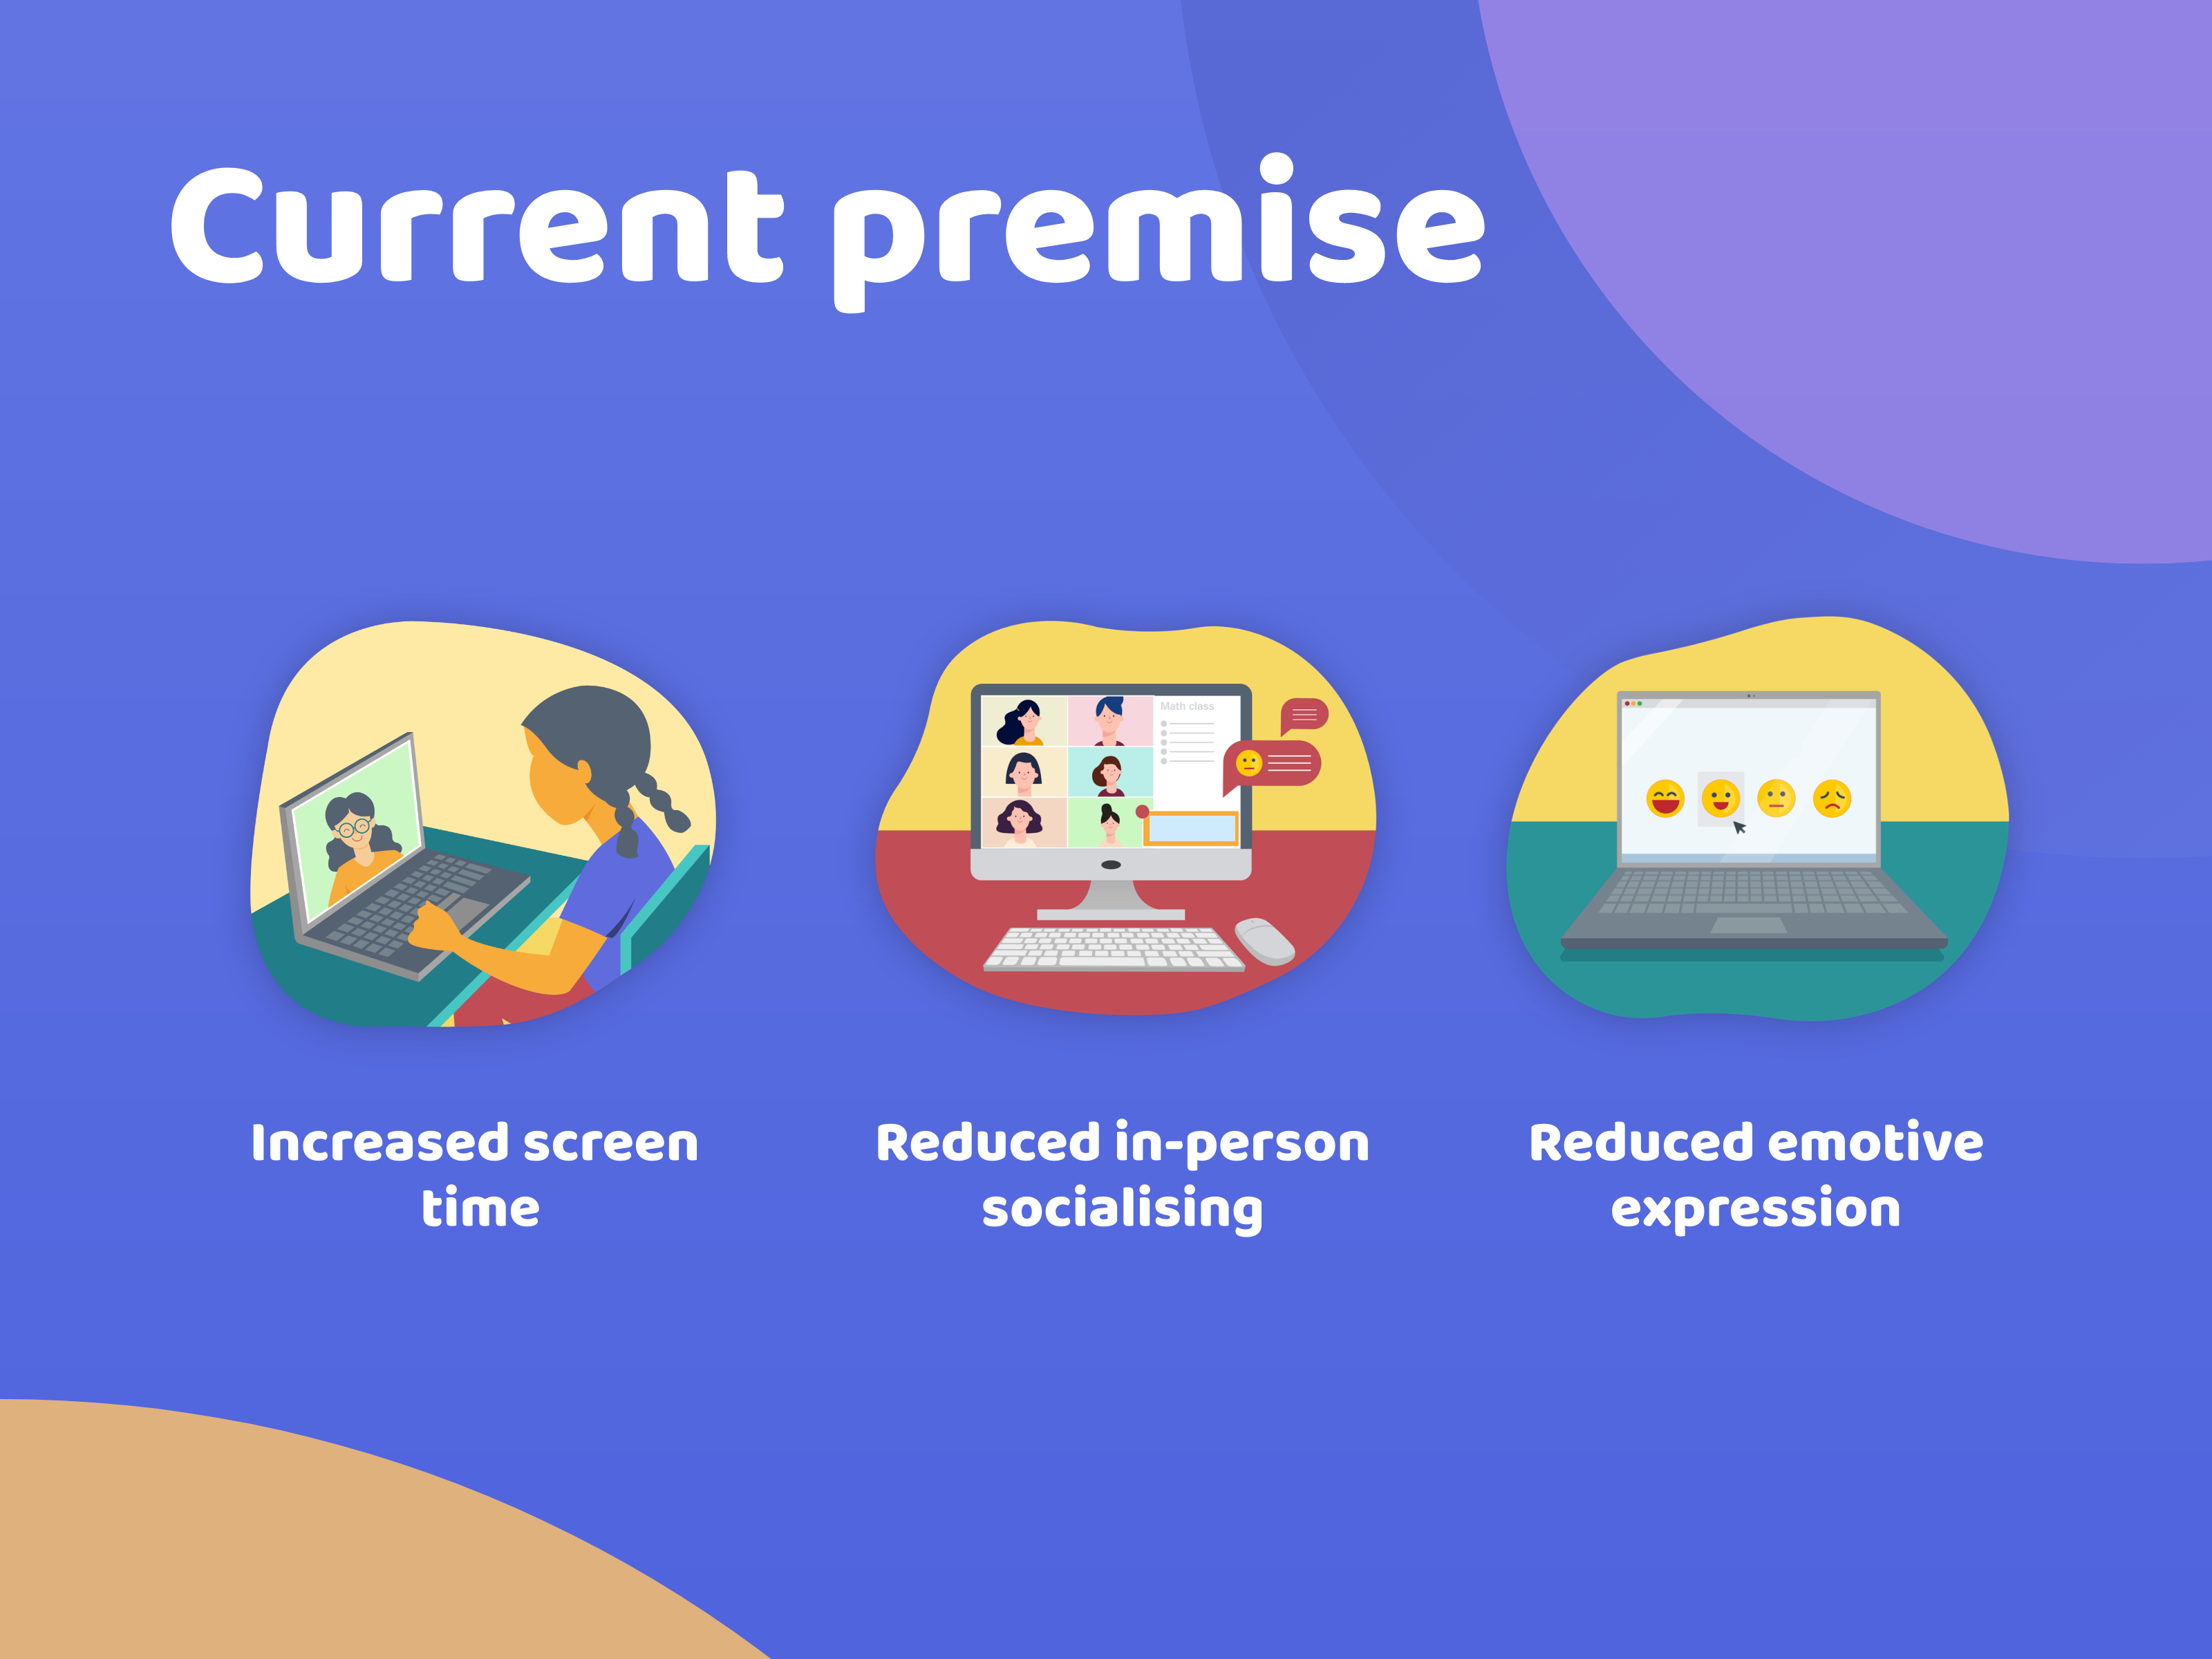 Journio - Enabling students to express their emotions